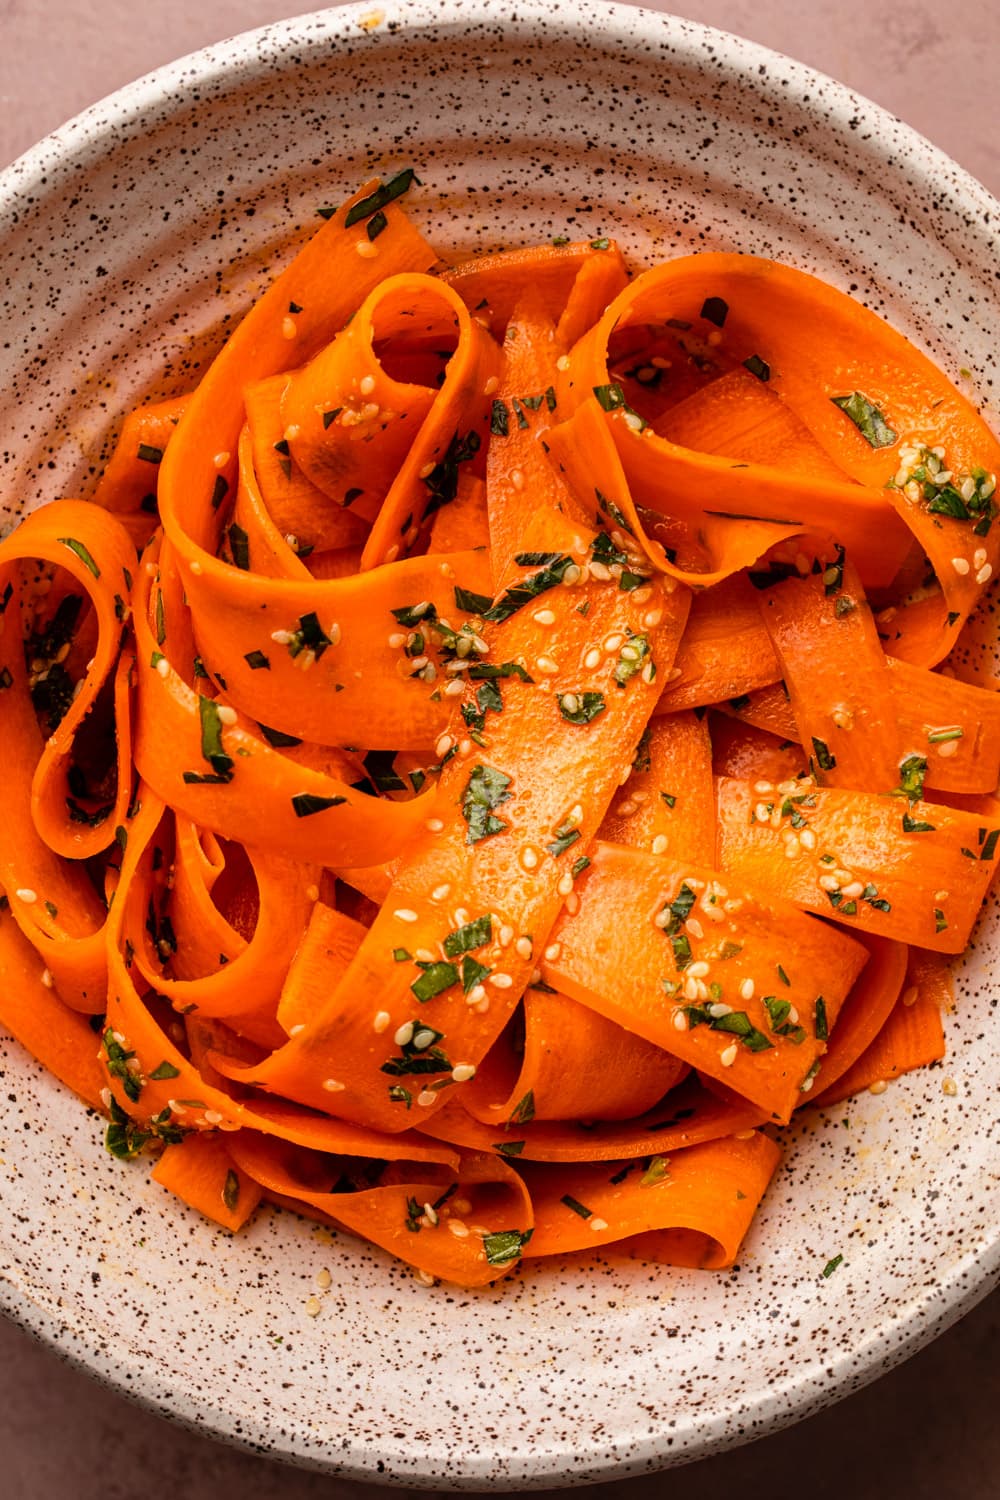 raw carrot salad served in a bowl